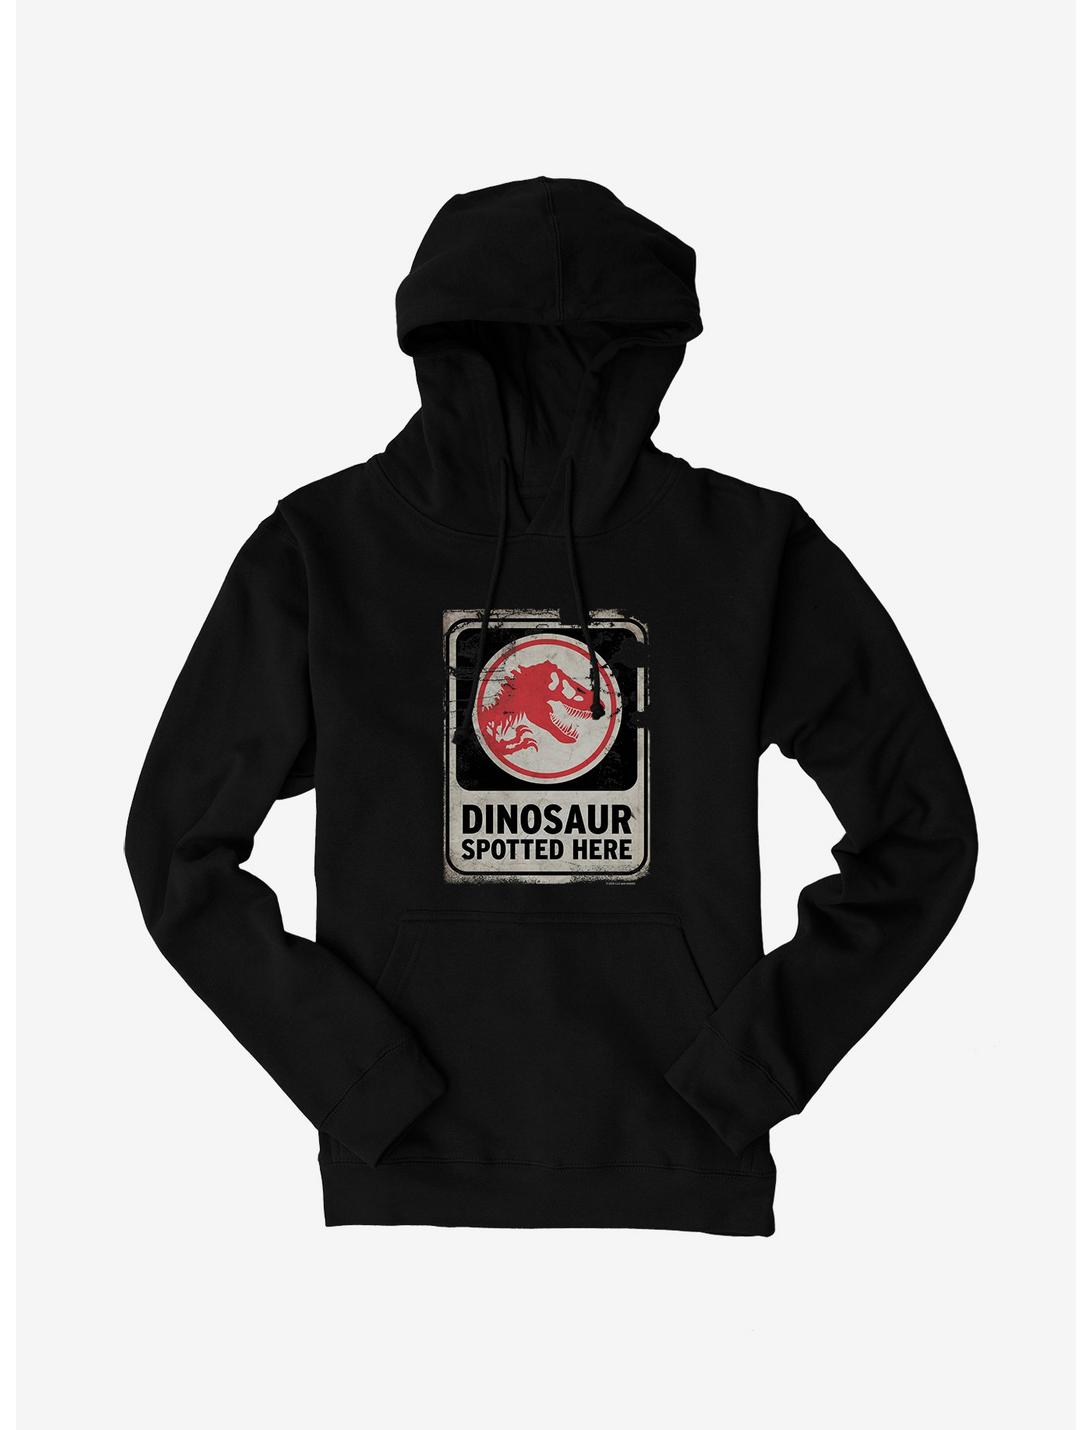 Jurassic World Dominion Dinosaur Spotted Here Hoodie, , hi-res